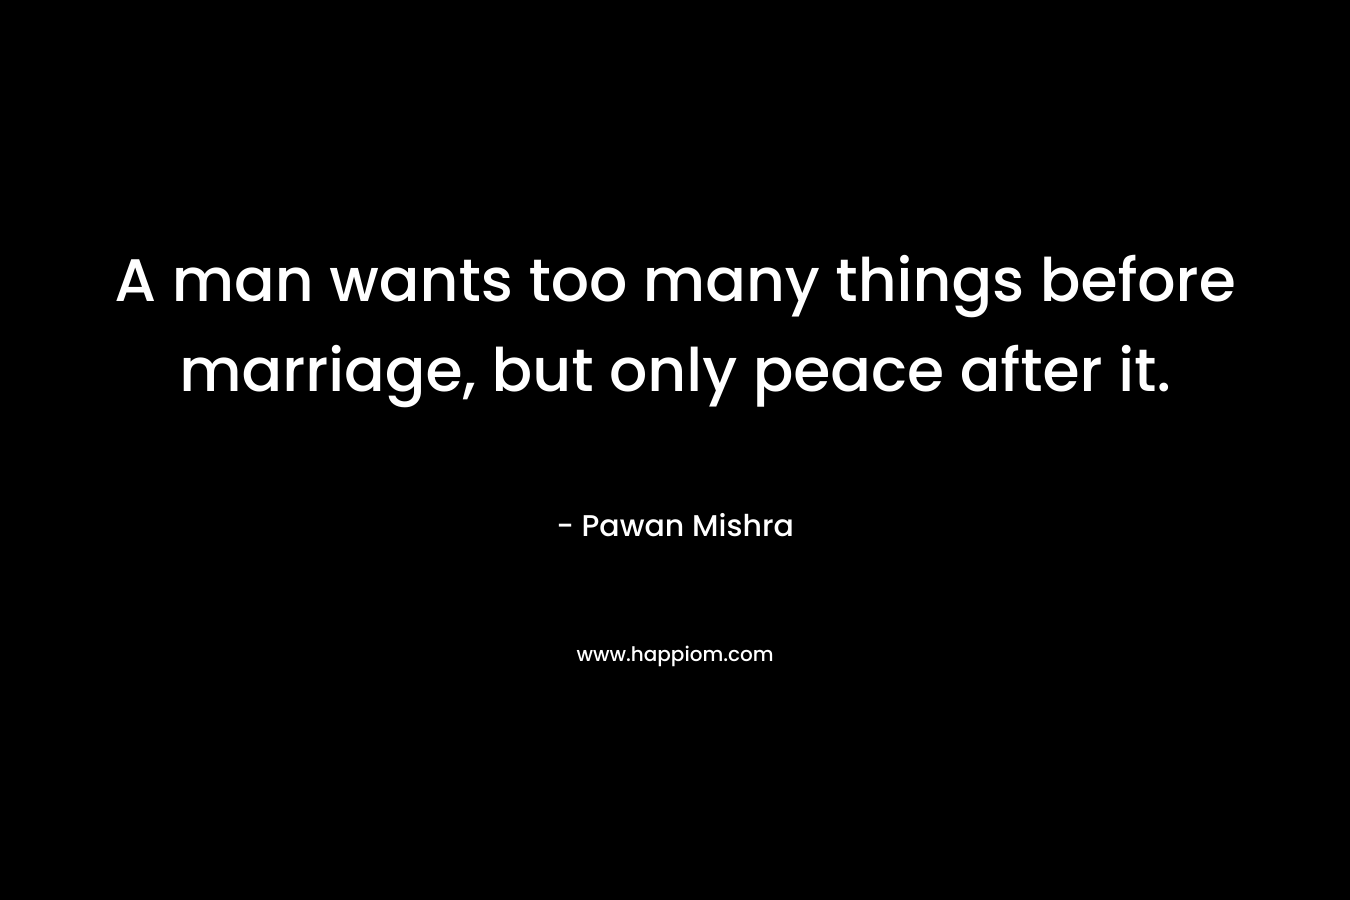 A man wants too many things before marriage, but only peace after it.